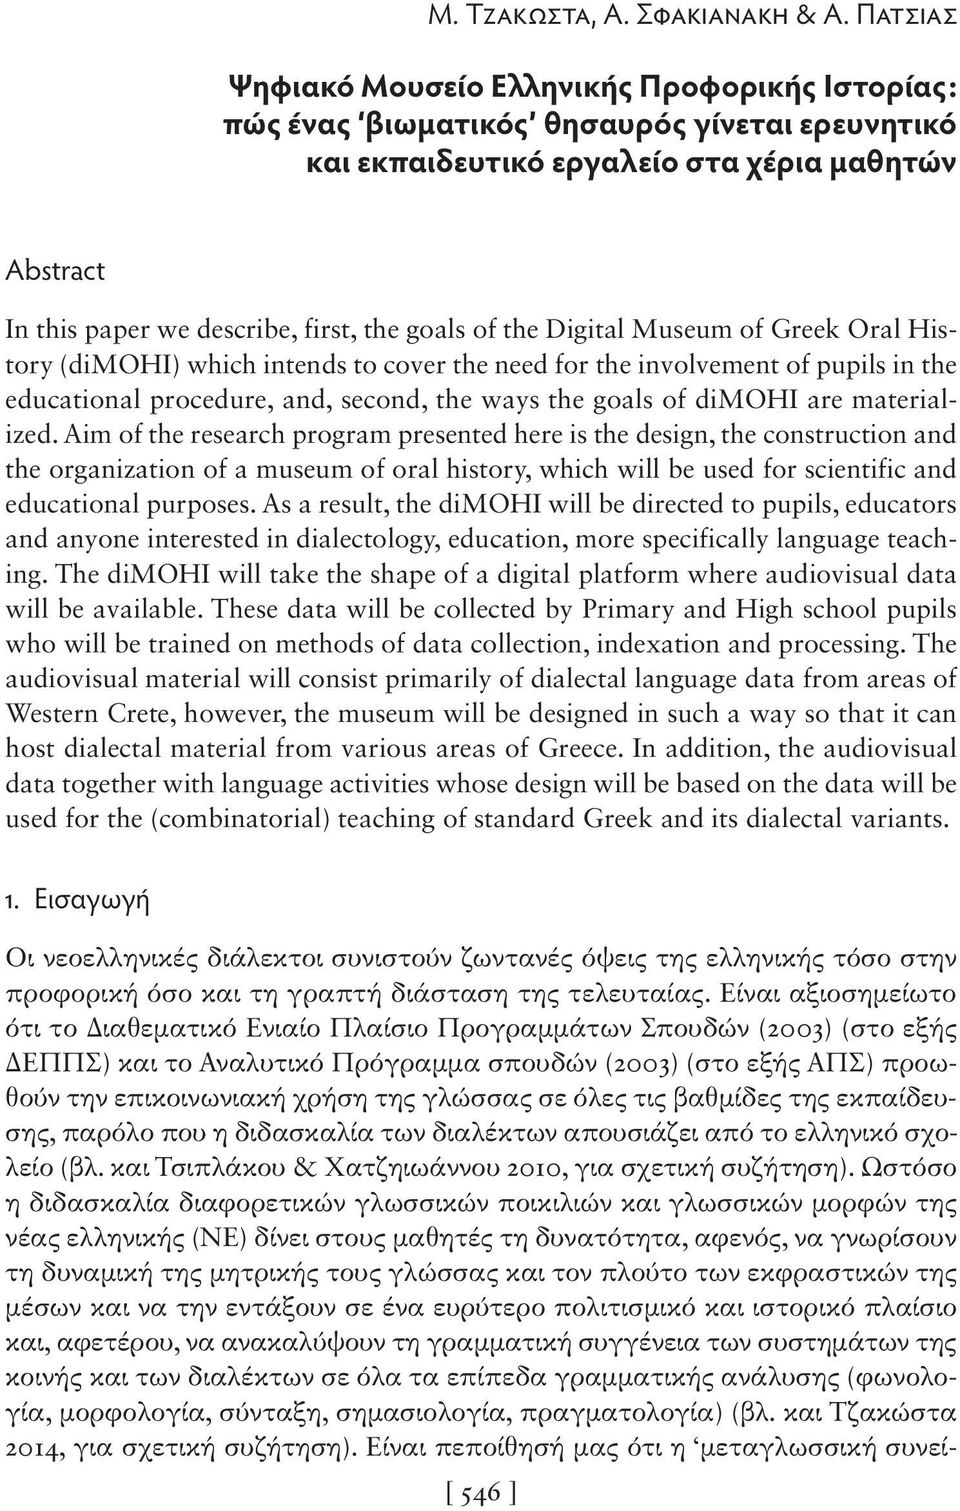 of the Digital Museum of Greek Oral History (dimohi) which intends to cover the need for the involvement of pupils in the educational procedure, and, second, the ways the goals of dimohi are